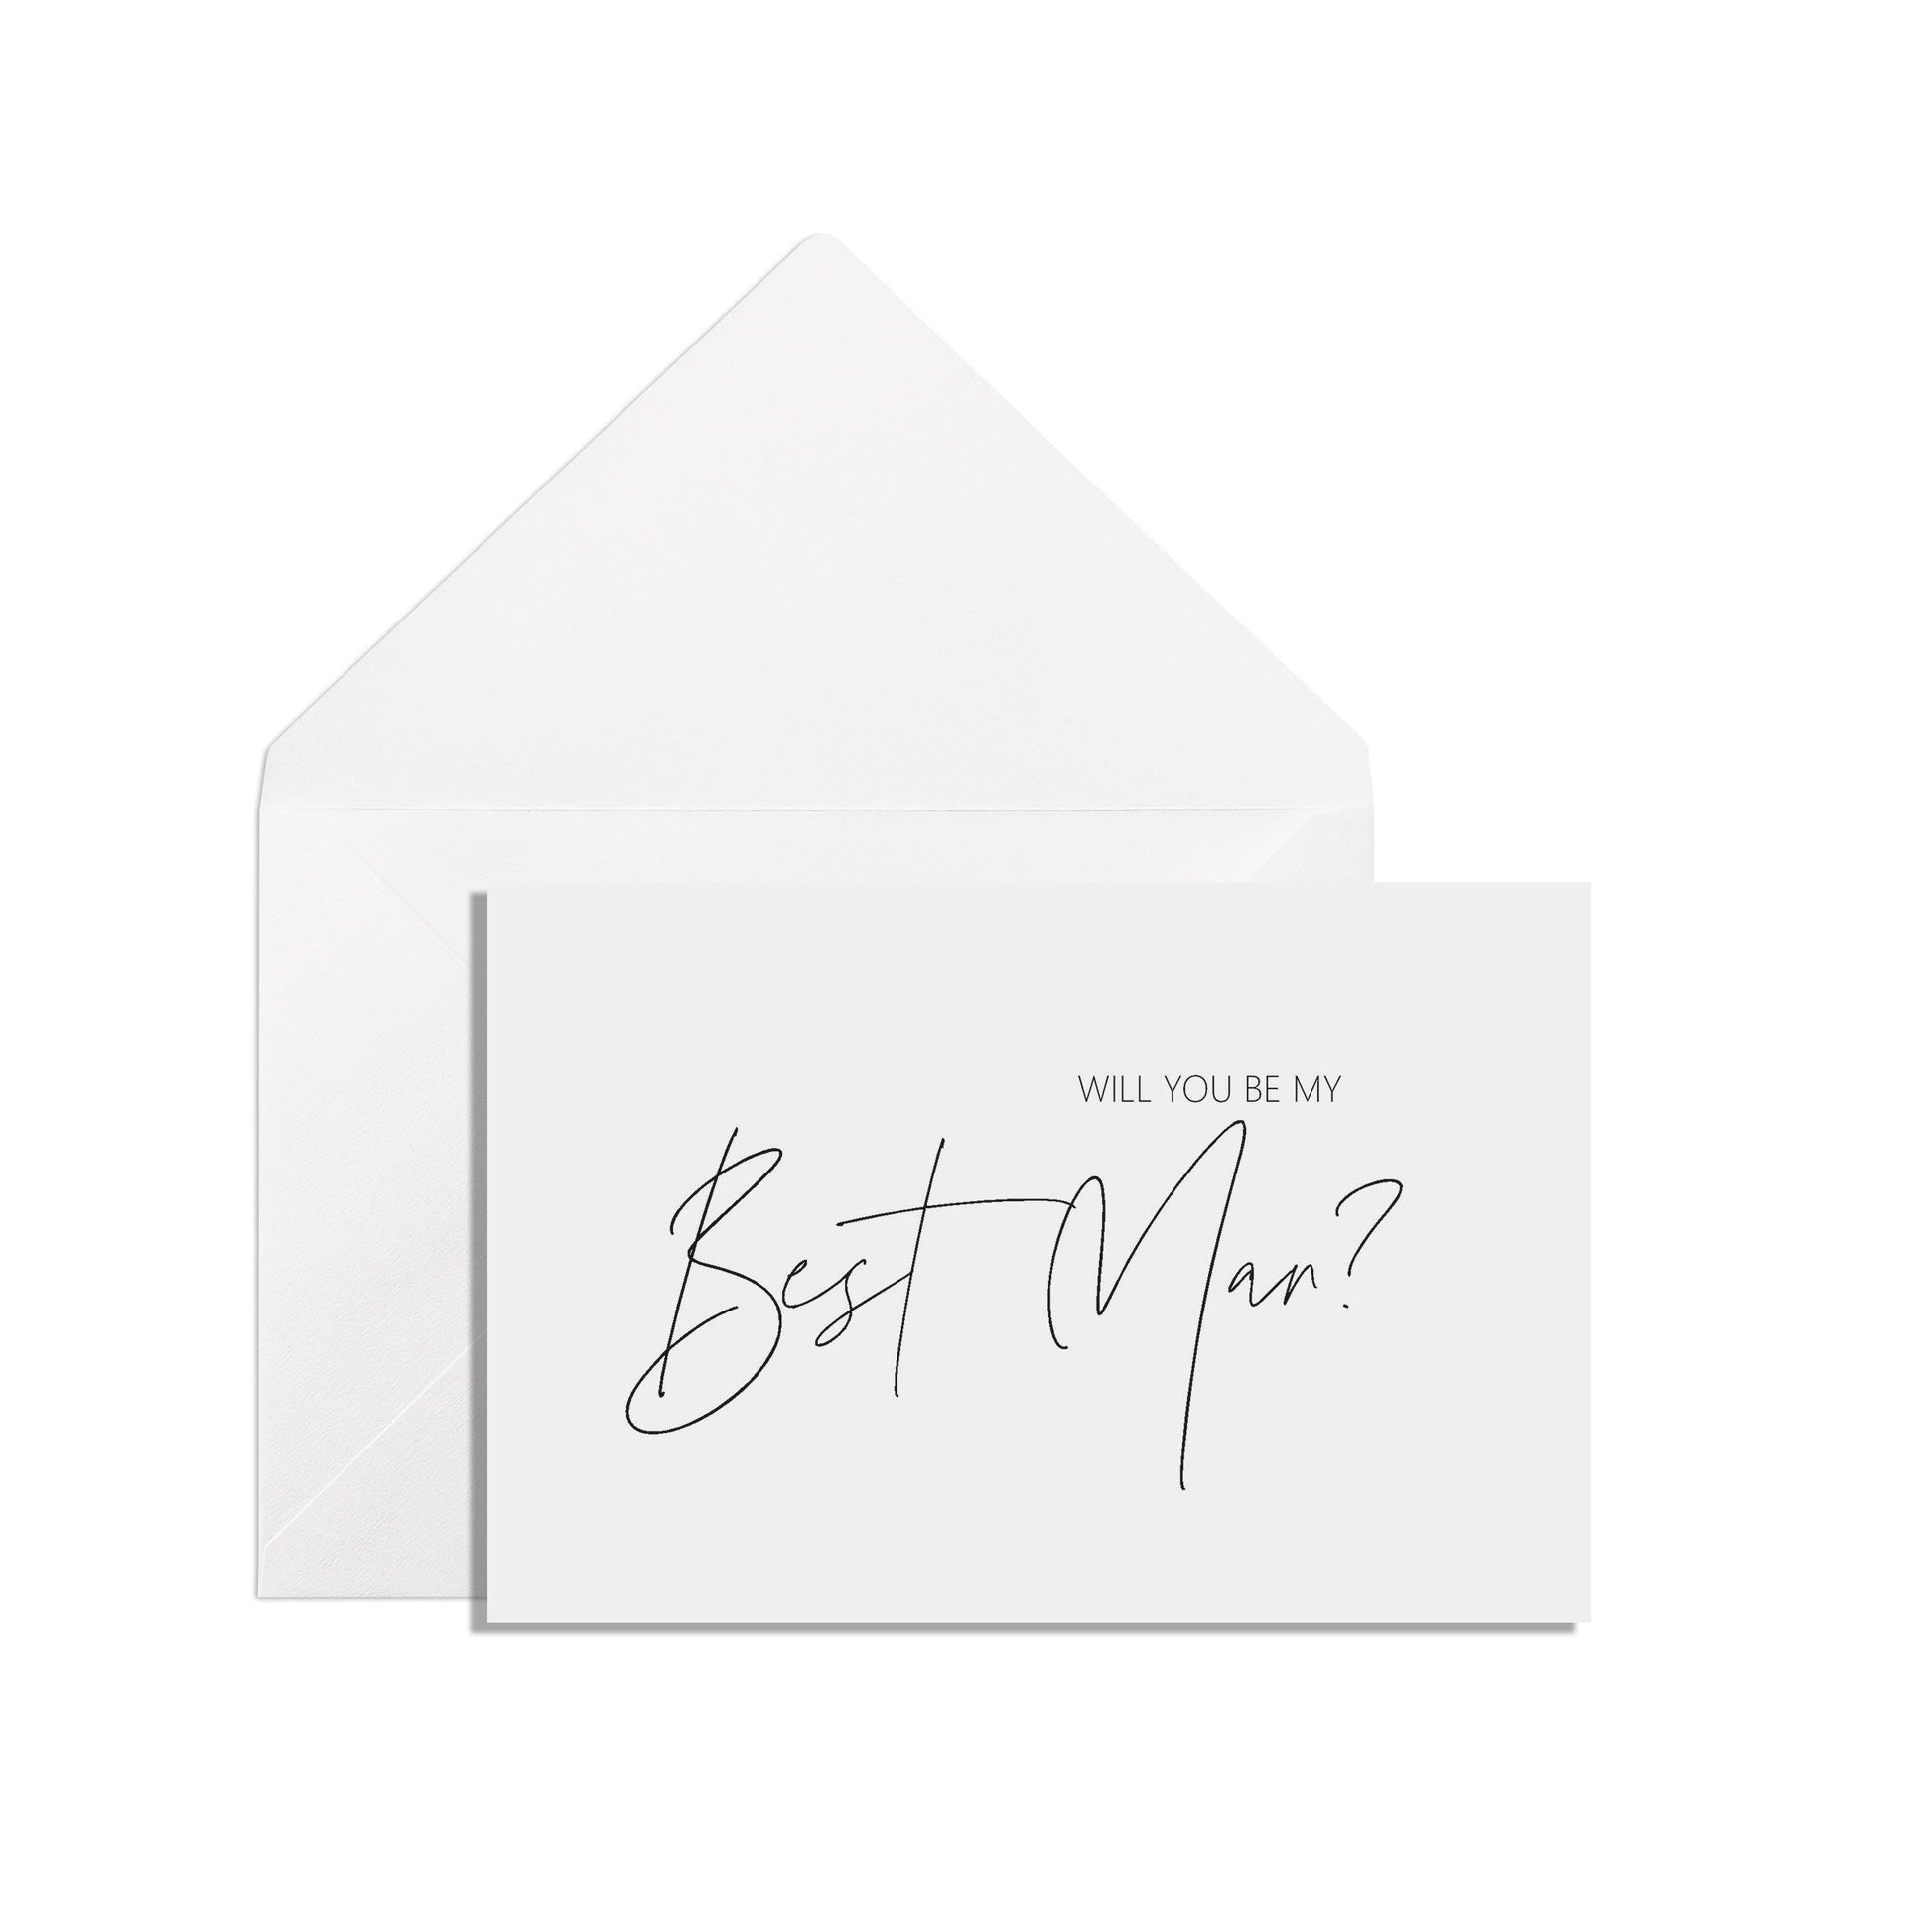  Will You Be My Best Man? A6 Black & White Proposal Card With White Envelope by PMPRINTED 